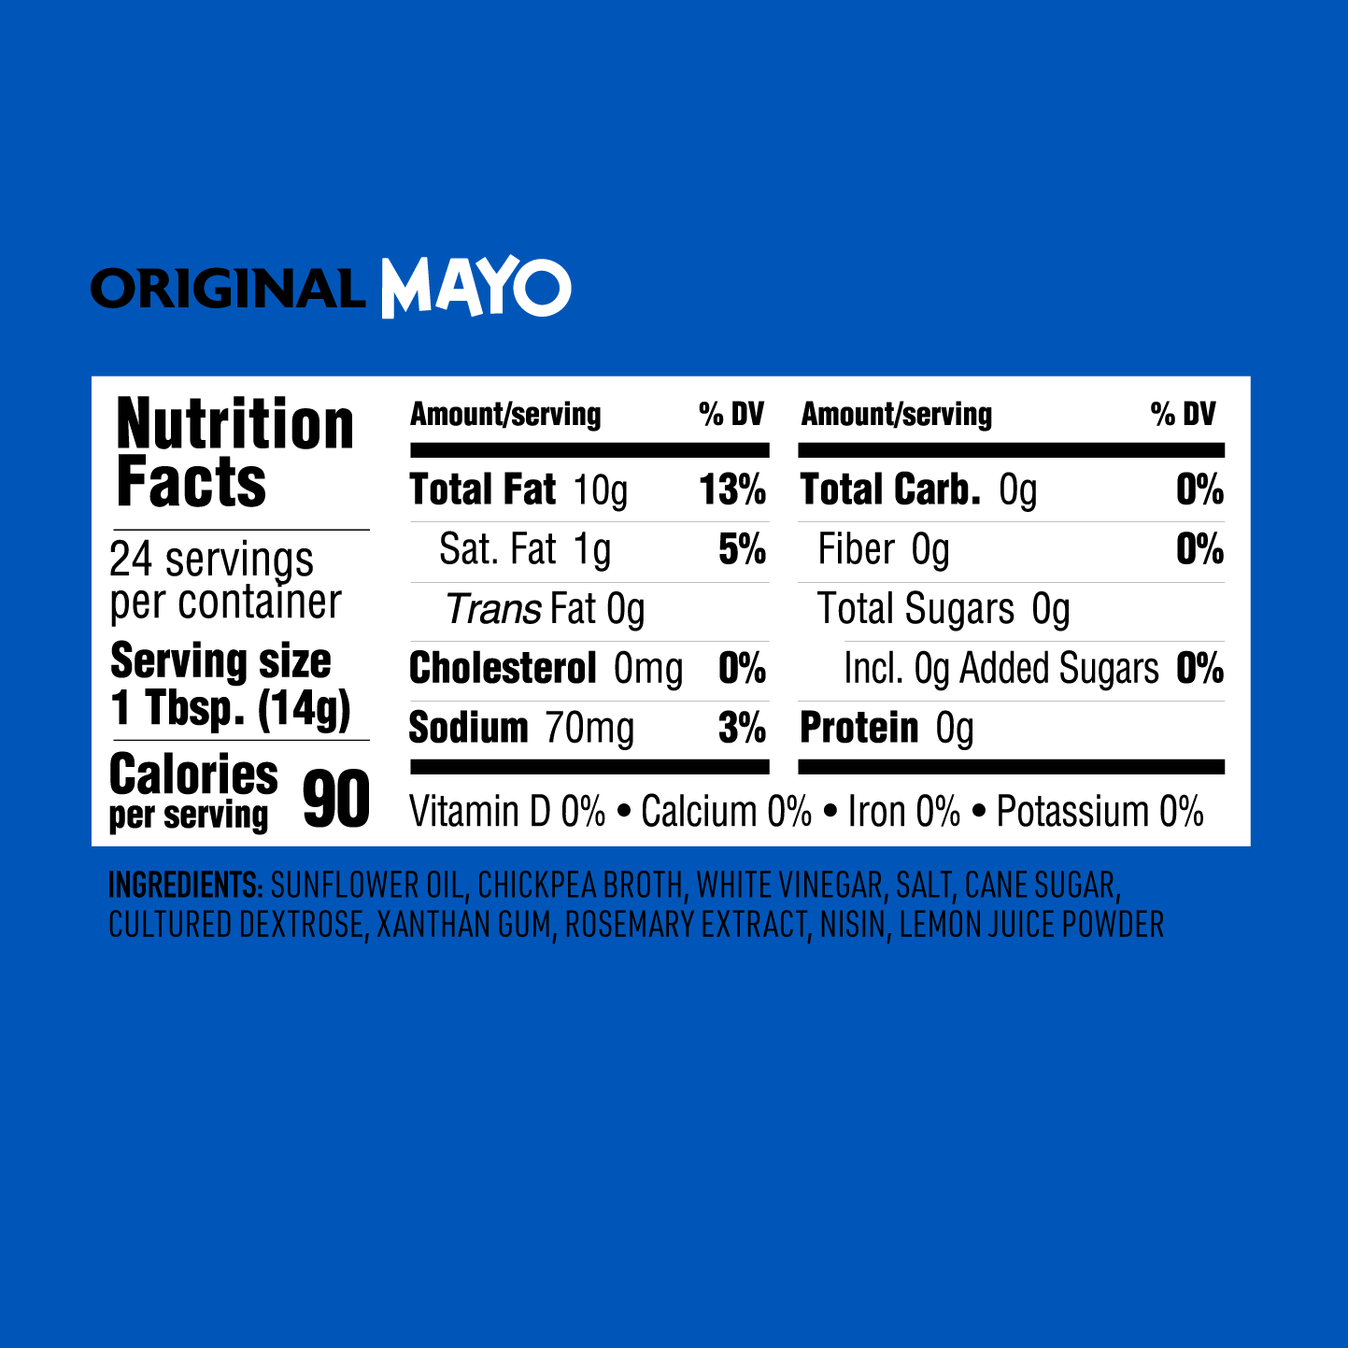 Nutrition facts for O'dang Foods brand Original Vegan Mayo made with chickpeas and sunflower oil. Carb free, cholesterol free, clean label.